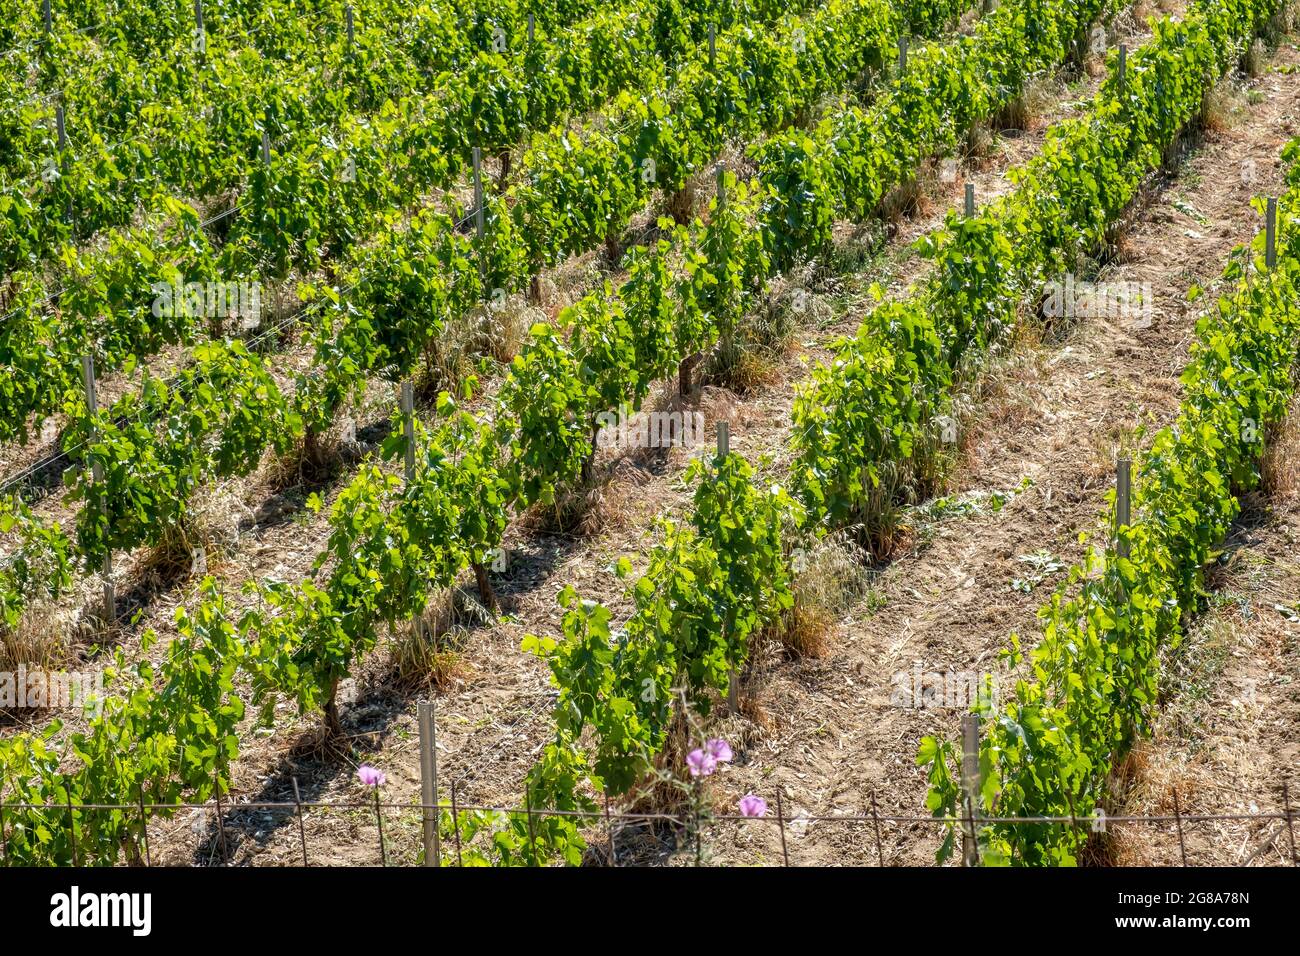 Vineyard grapevines concept. Grape vines in rows fresh plants with green leaves above view of rural countryside. Waiting for harvest and the new wine. Stock Photo